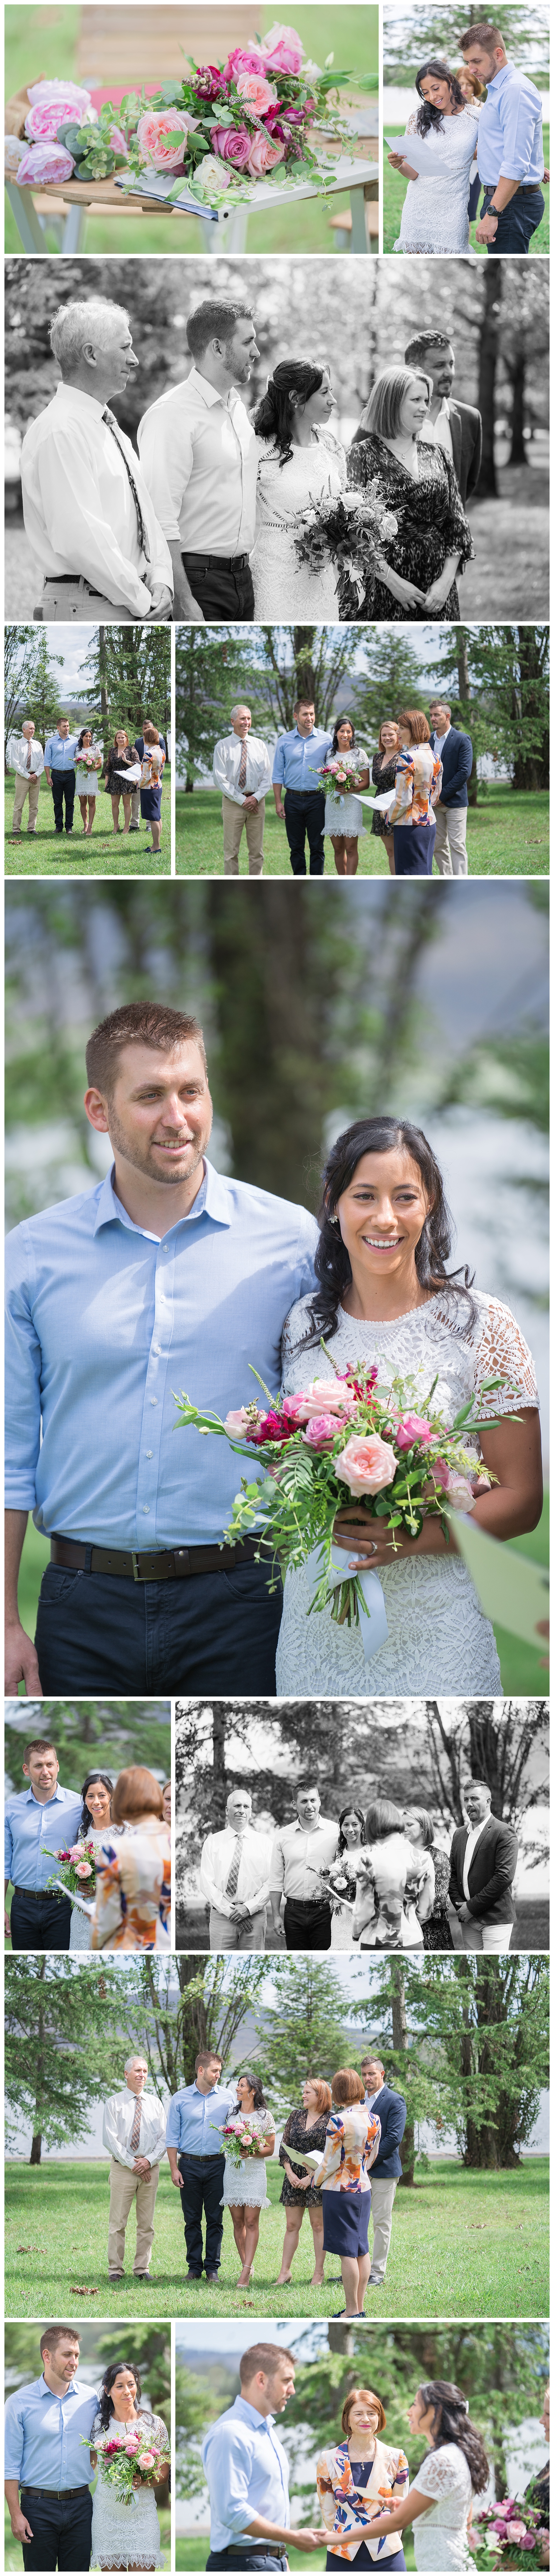 Canberra Elopement images in Lennox Gardens